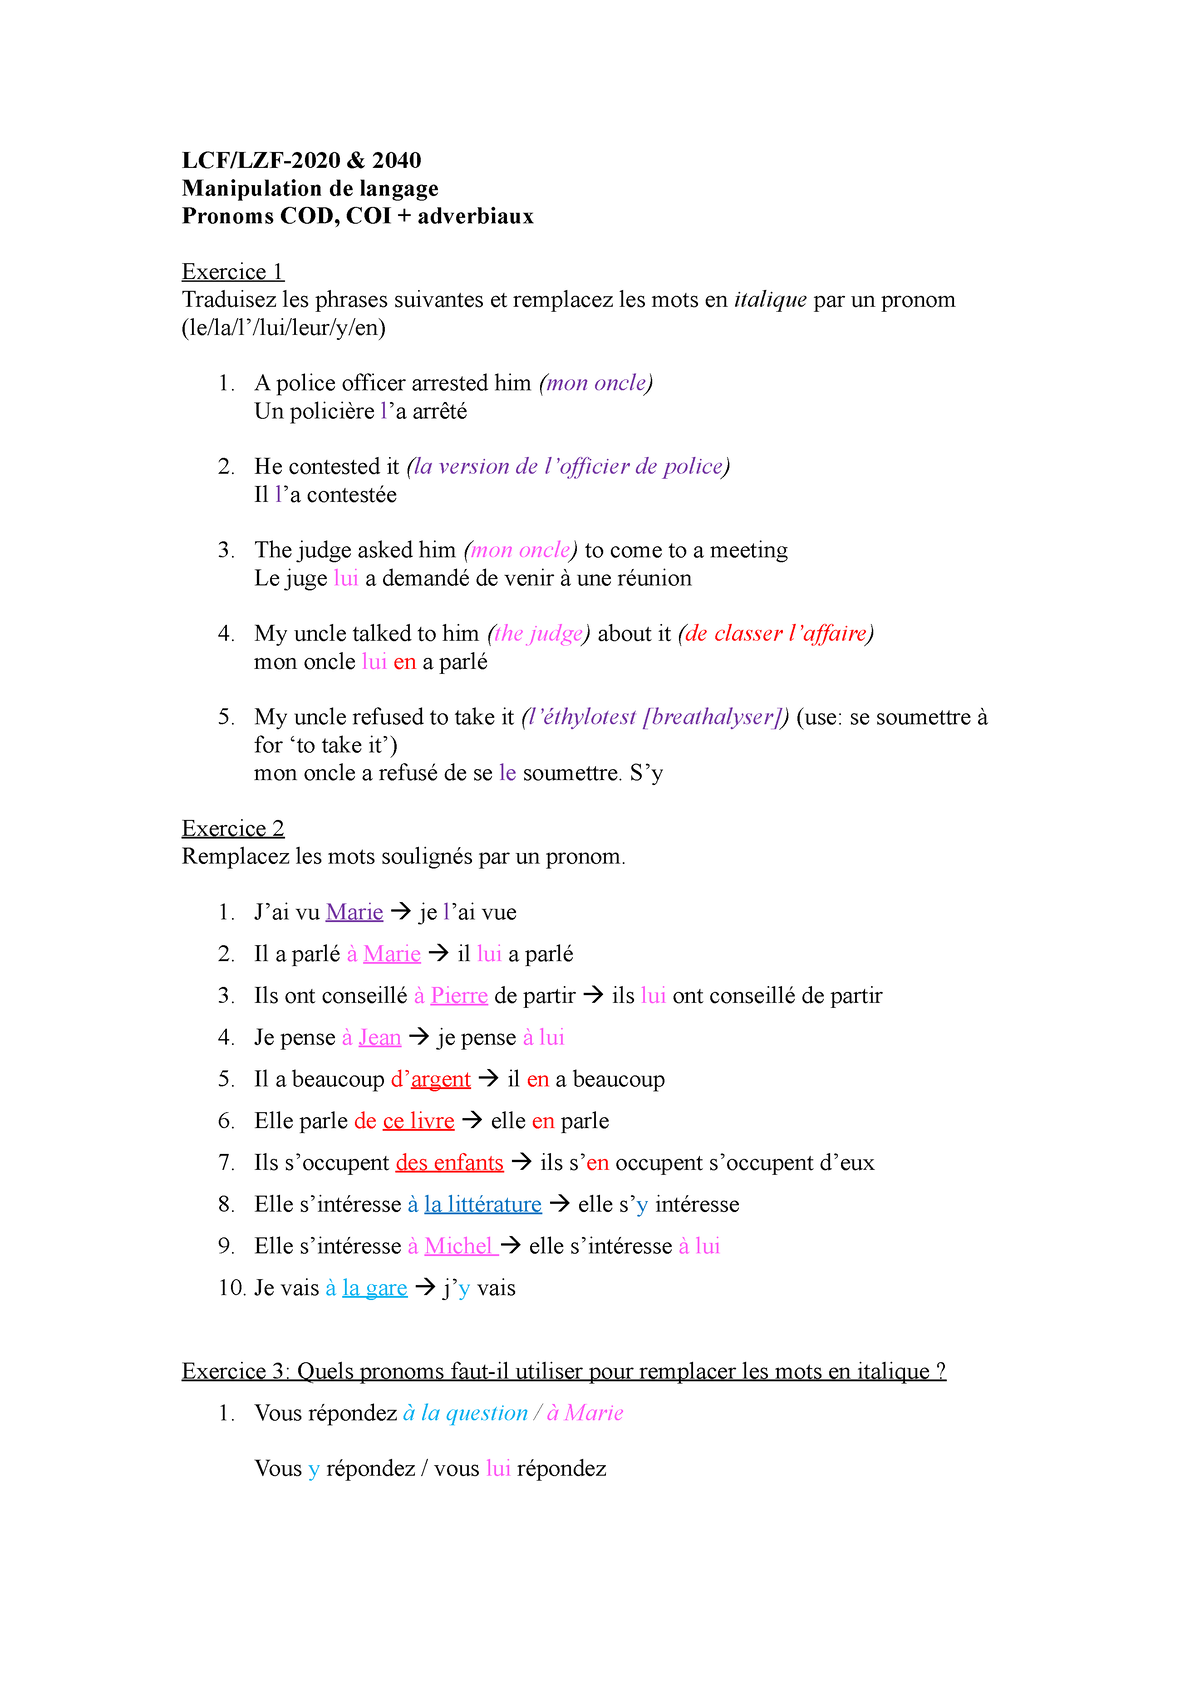 direct-and-indirect-pronouns-exercises-lcf-lzf-2020-2040